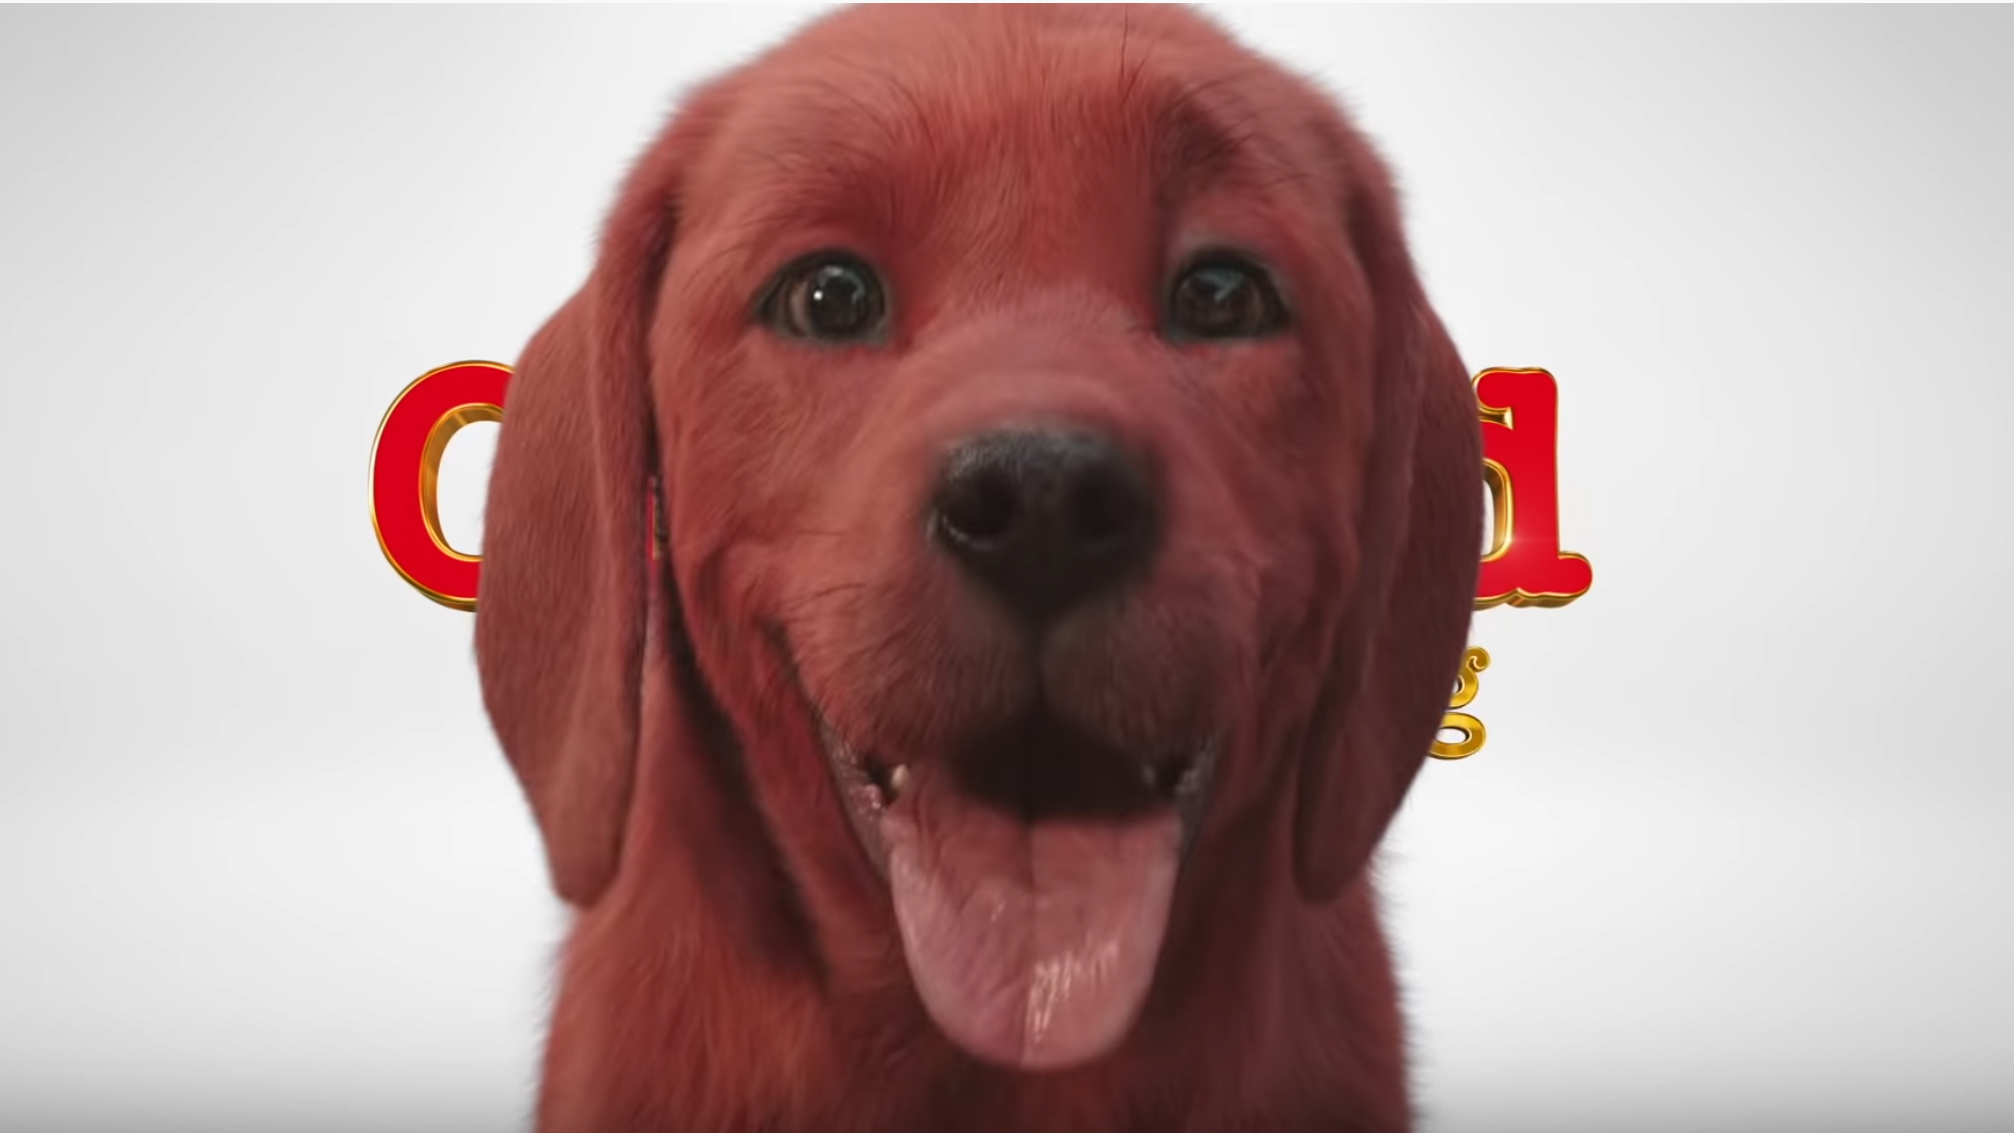 Clifford the Big Red Dog' live action trailer criticized for depiction of dog